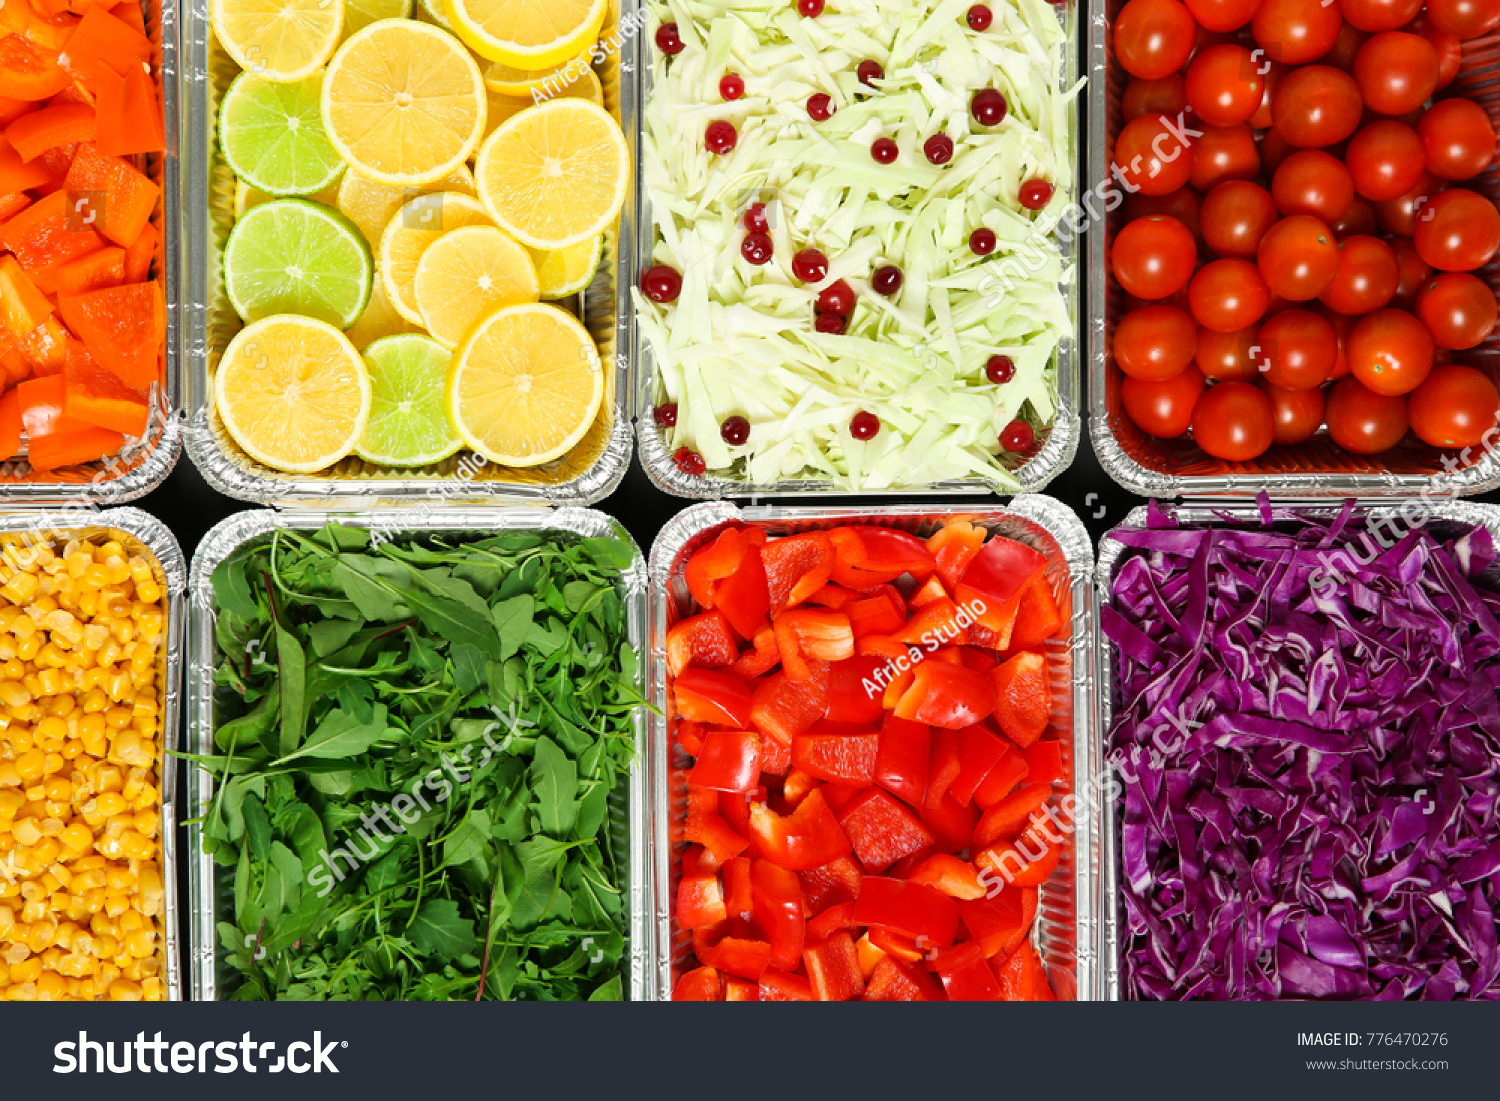 Top view of salad bar with assortment of ingredients #776470276